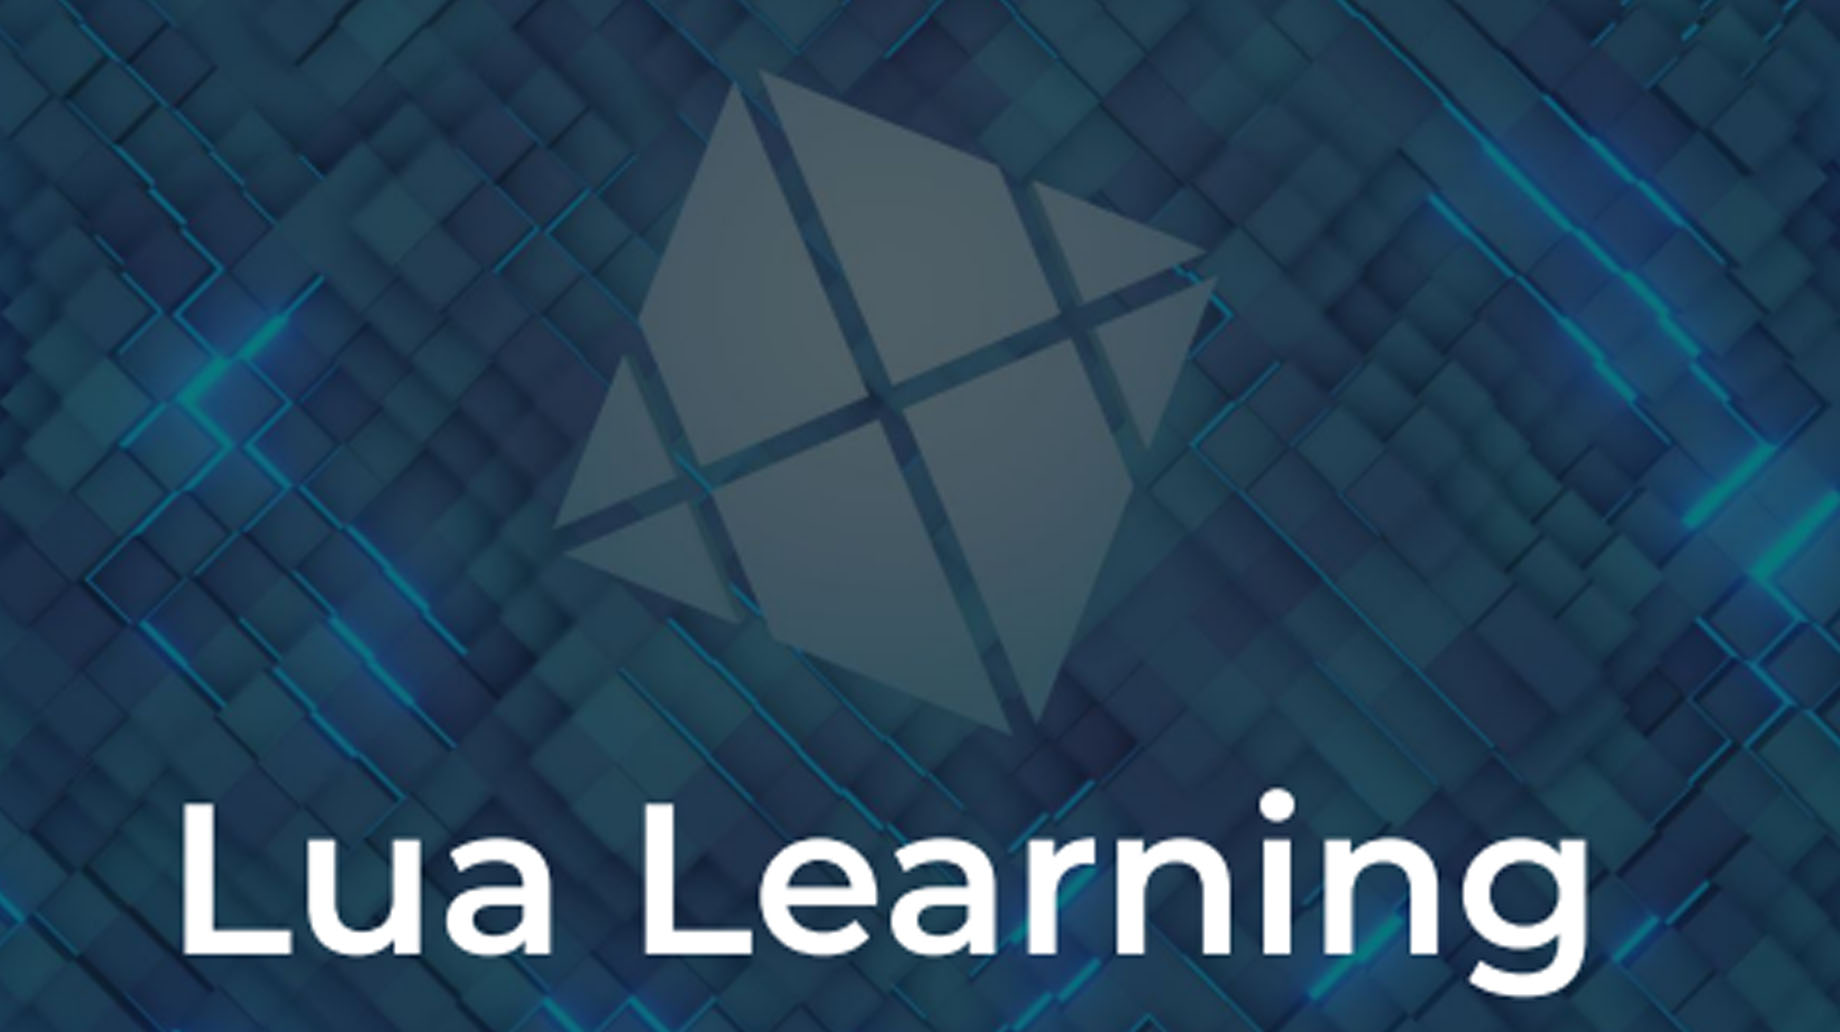 A logo with the words Lua Learning underneath